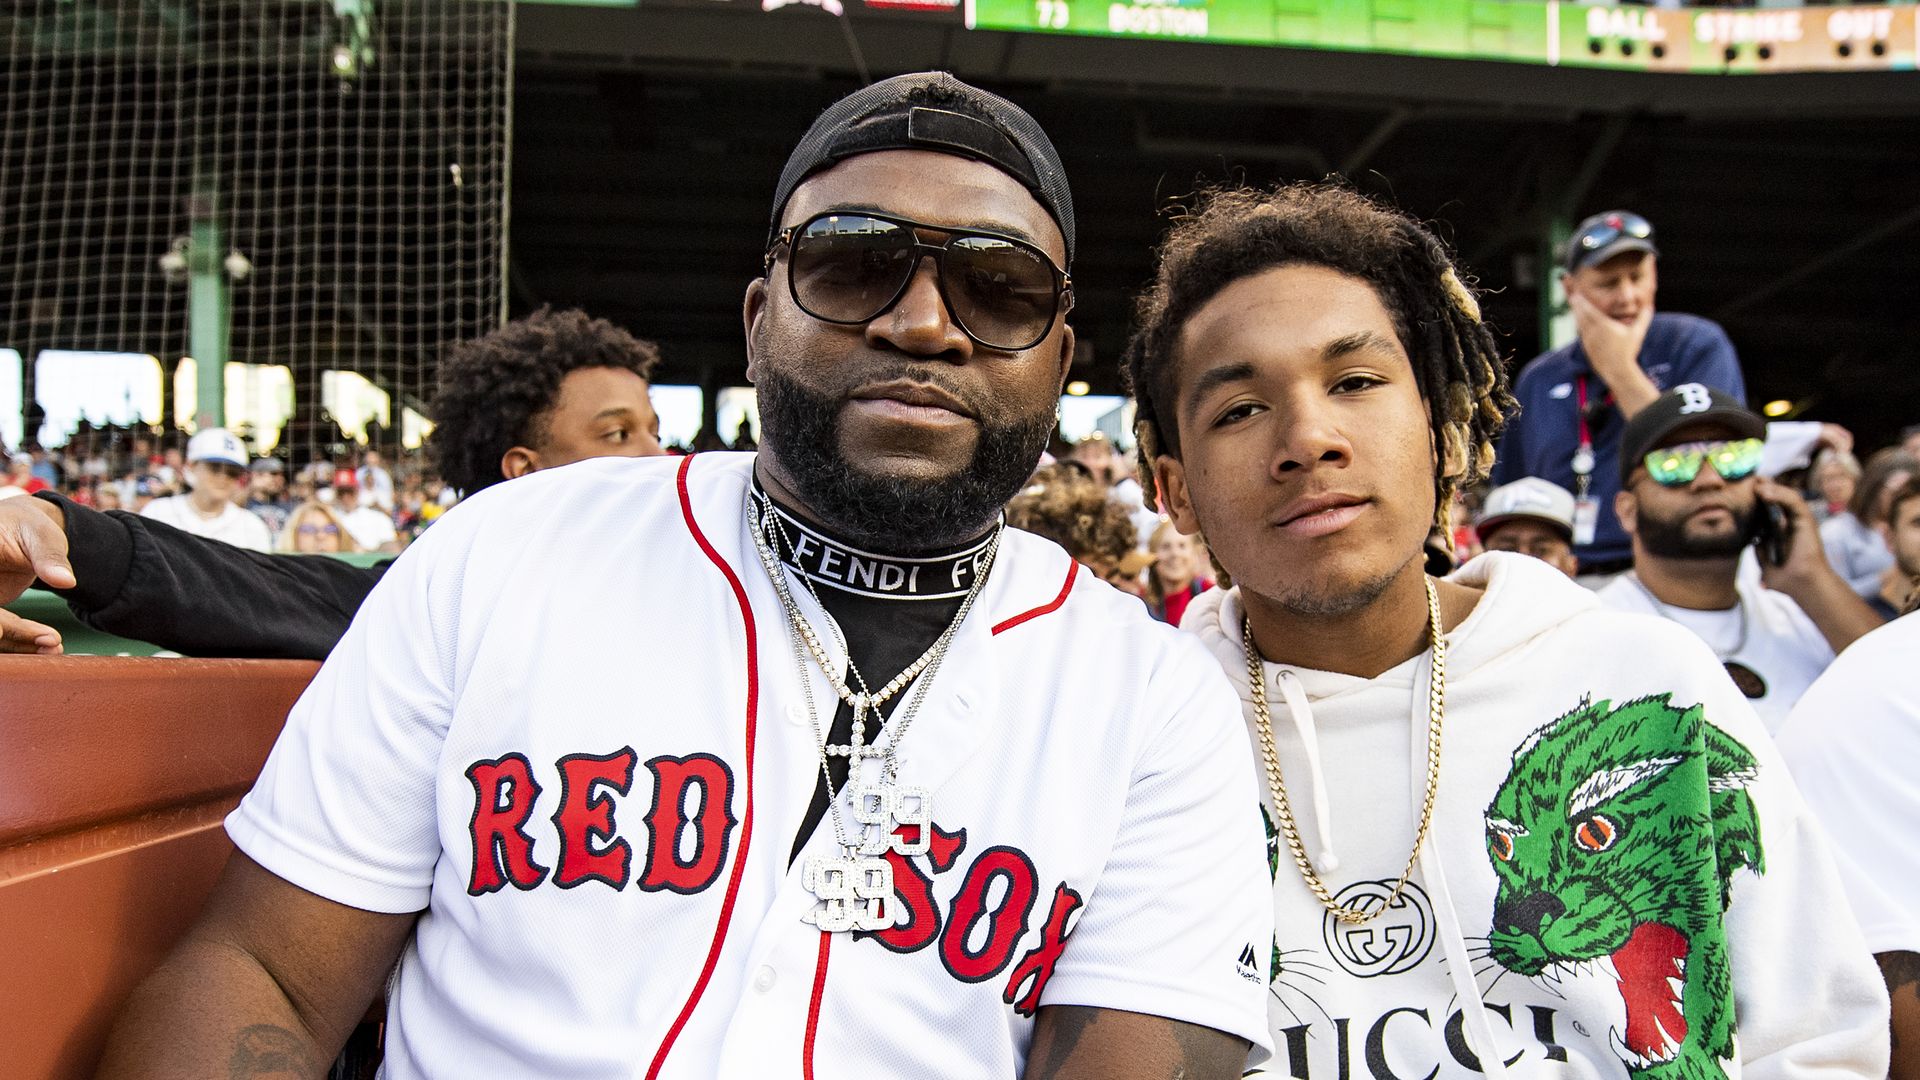 David Ortiz and his son D'Angelo Ortiz at Fenway Park last week. Photo: Billie Weiss/Getty Images